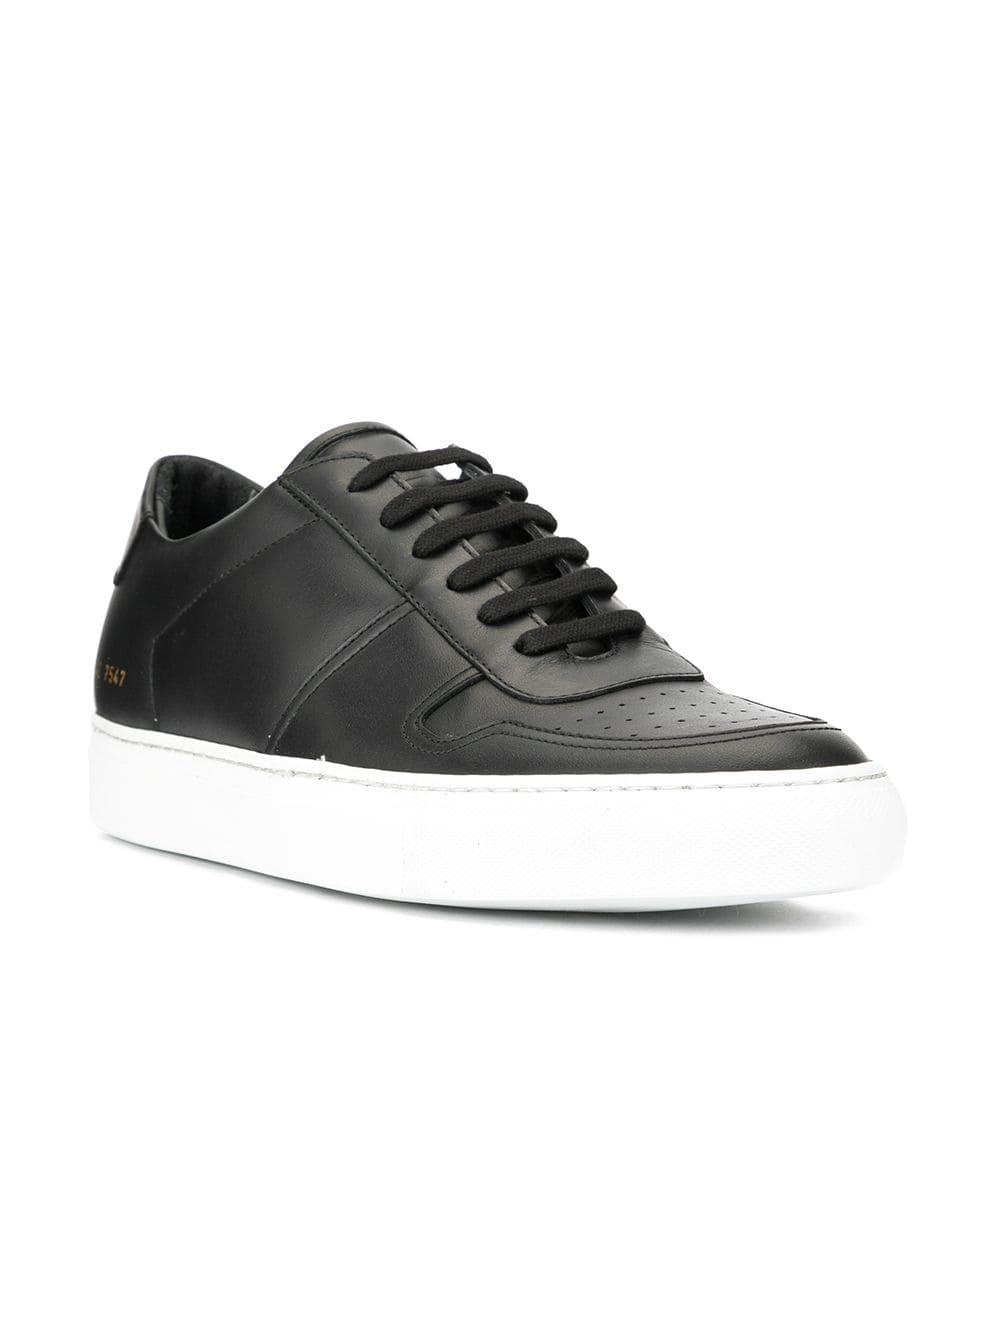 Common Projects Leather Bball Low Sneakers in Black for Men - Lyst